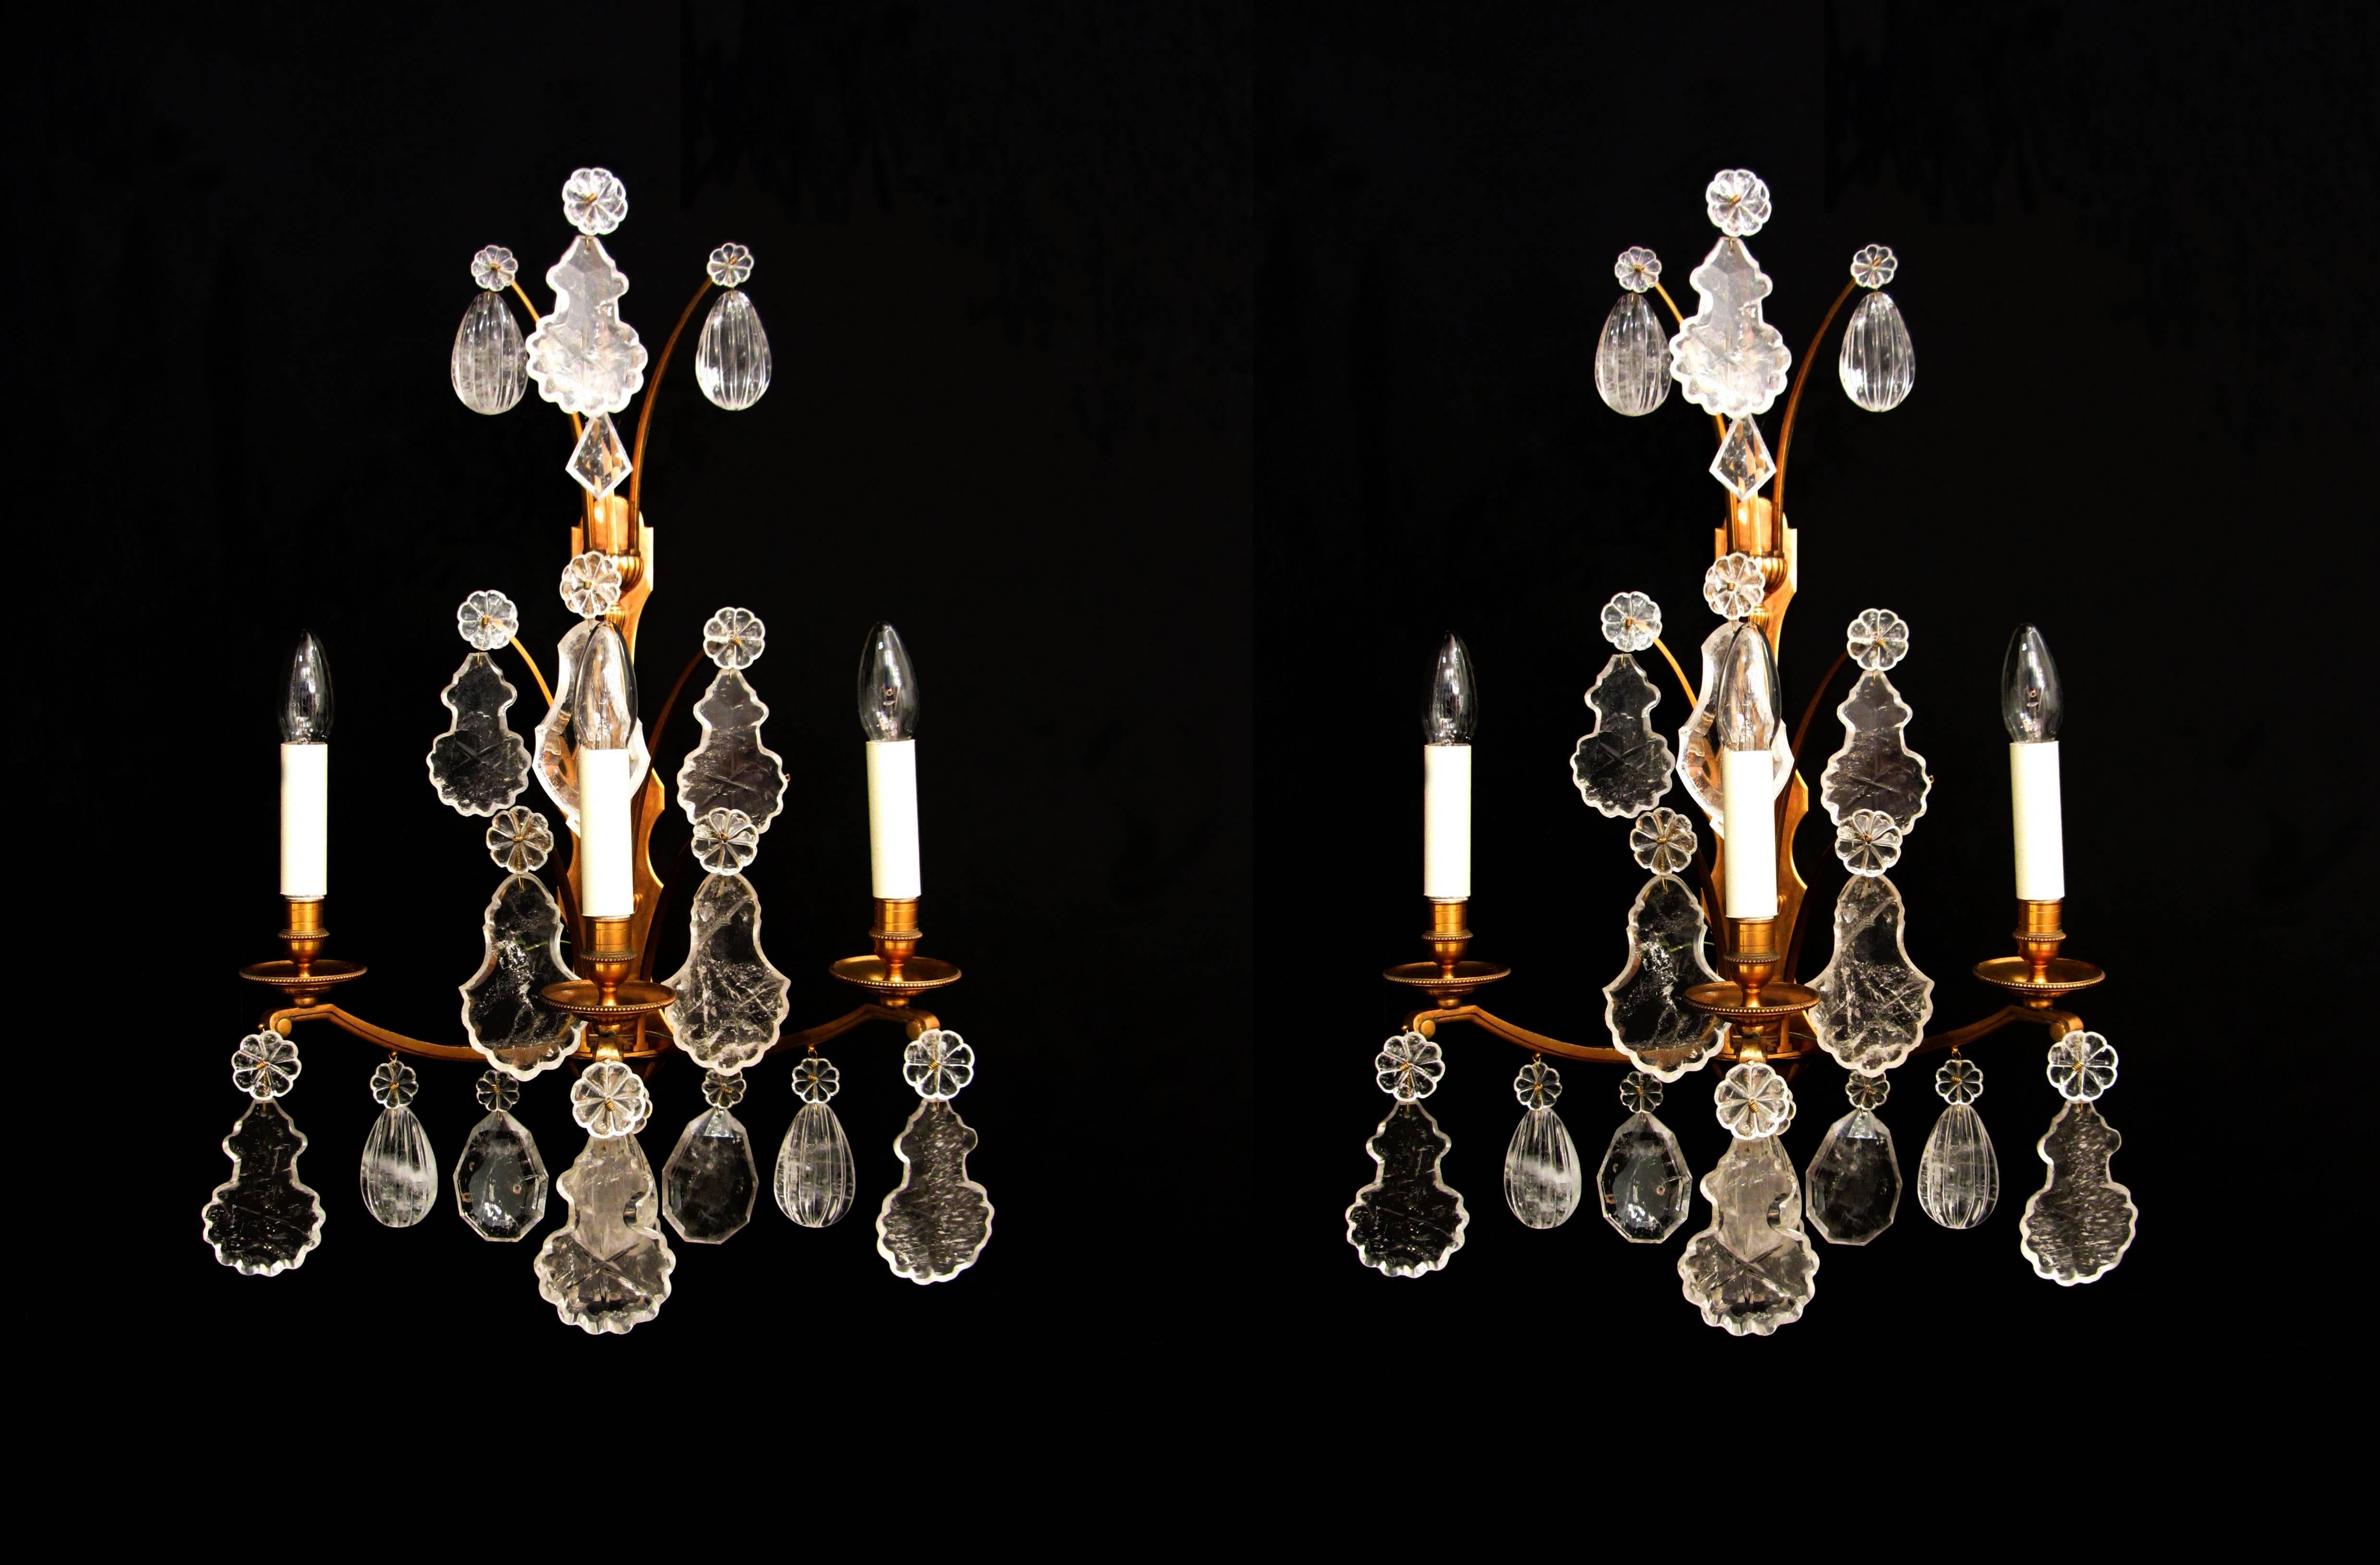 A pair of large-scale, gilt brass, three-arm wall lights, with fine rock crystal plaques and rosettes. (A similar pair is available to make a set of four).